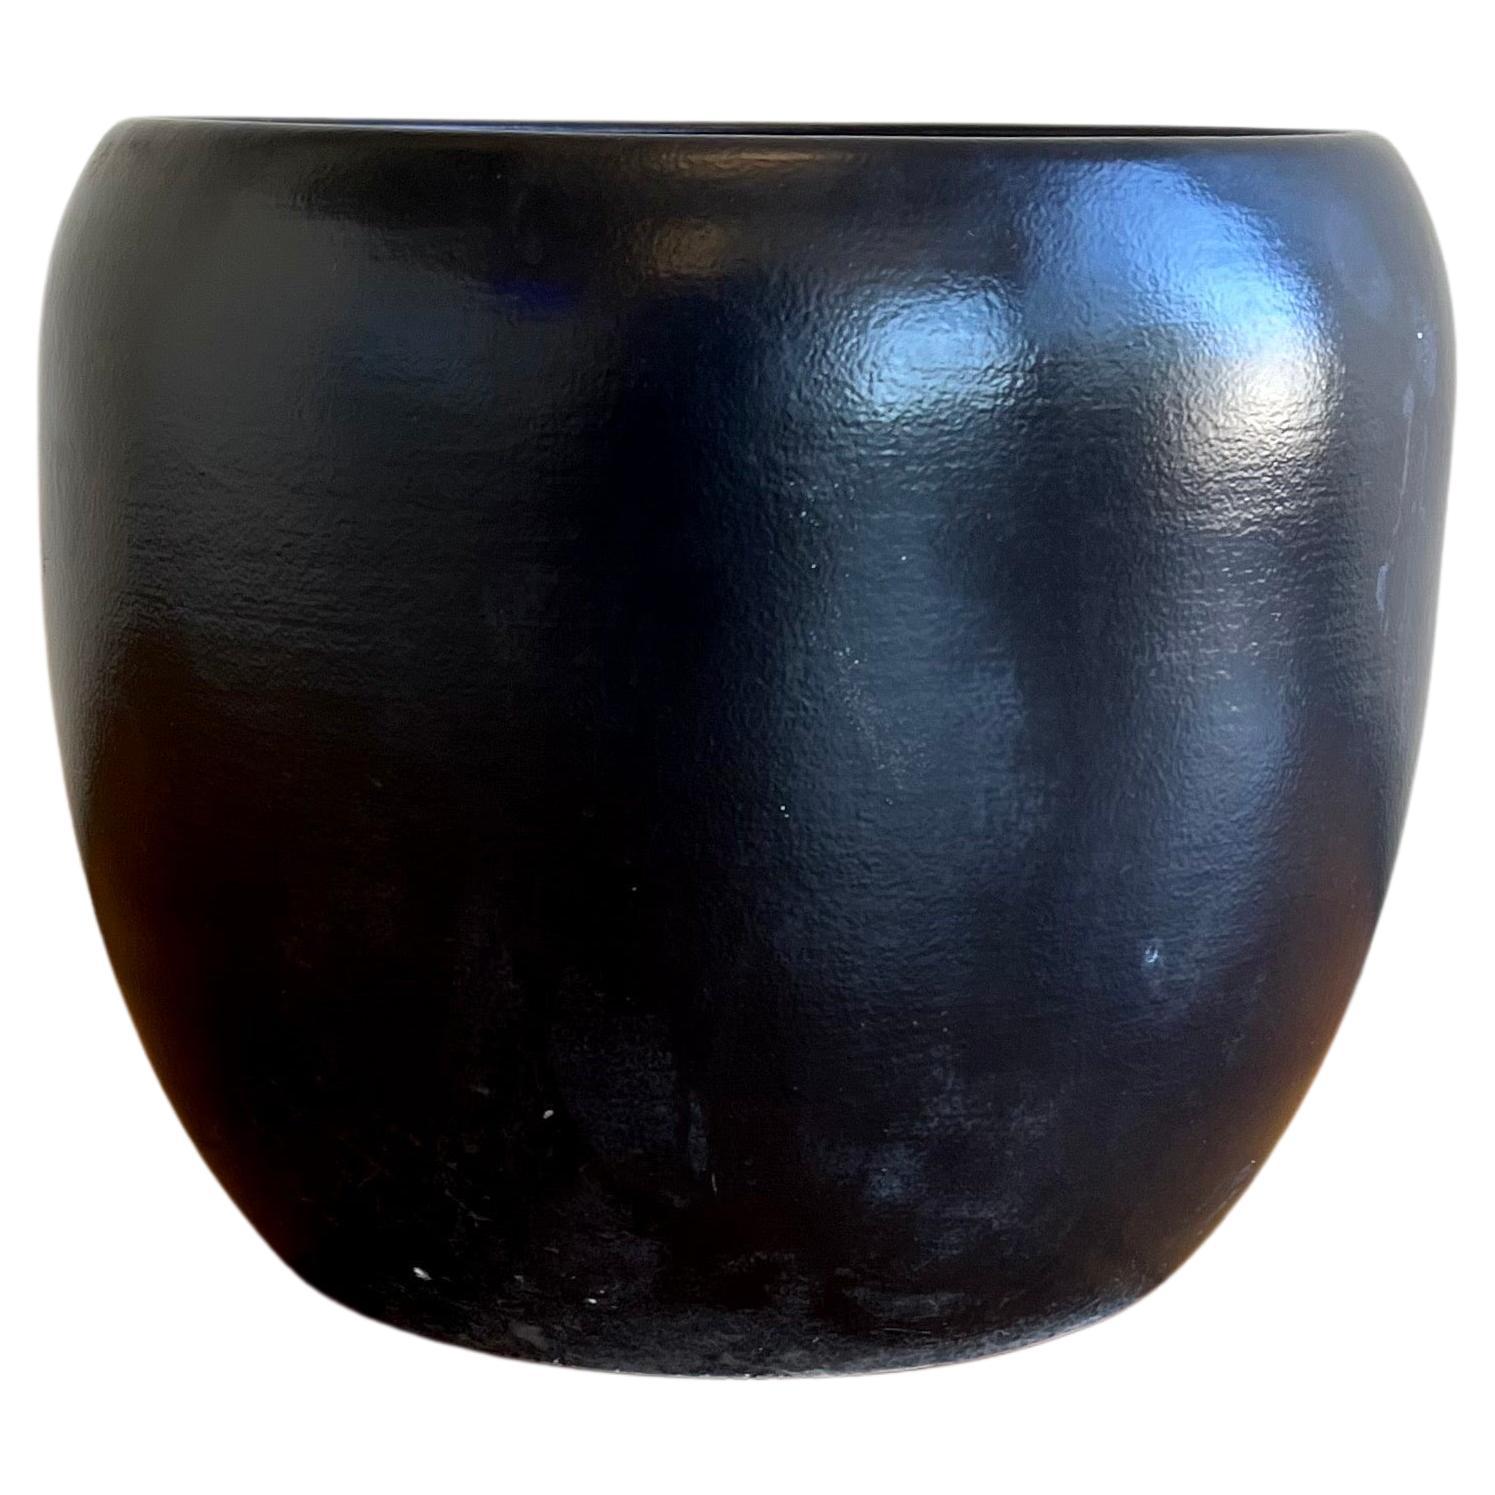 Large rounded planter pot. Earlier production by Gainey of LaVerne Ca. beautiful black glaze satin finish small chip repair on the bottom as shown invisible to the eye.